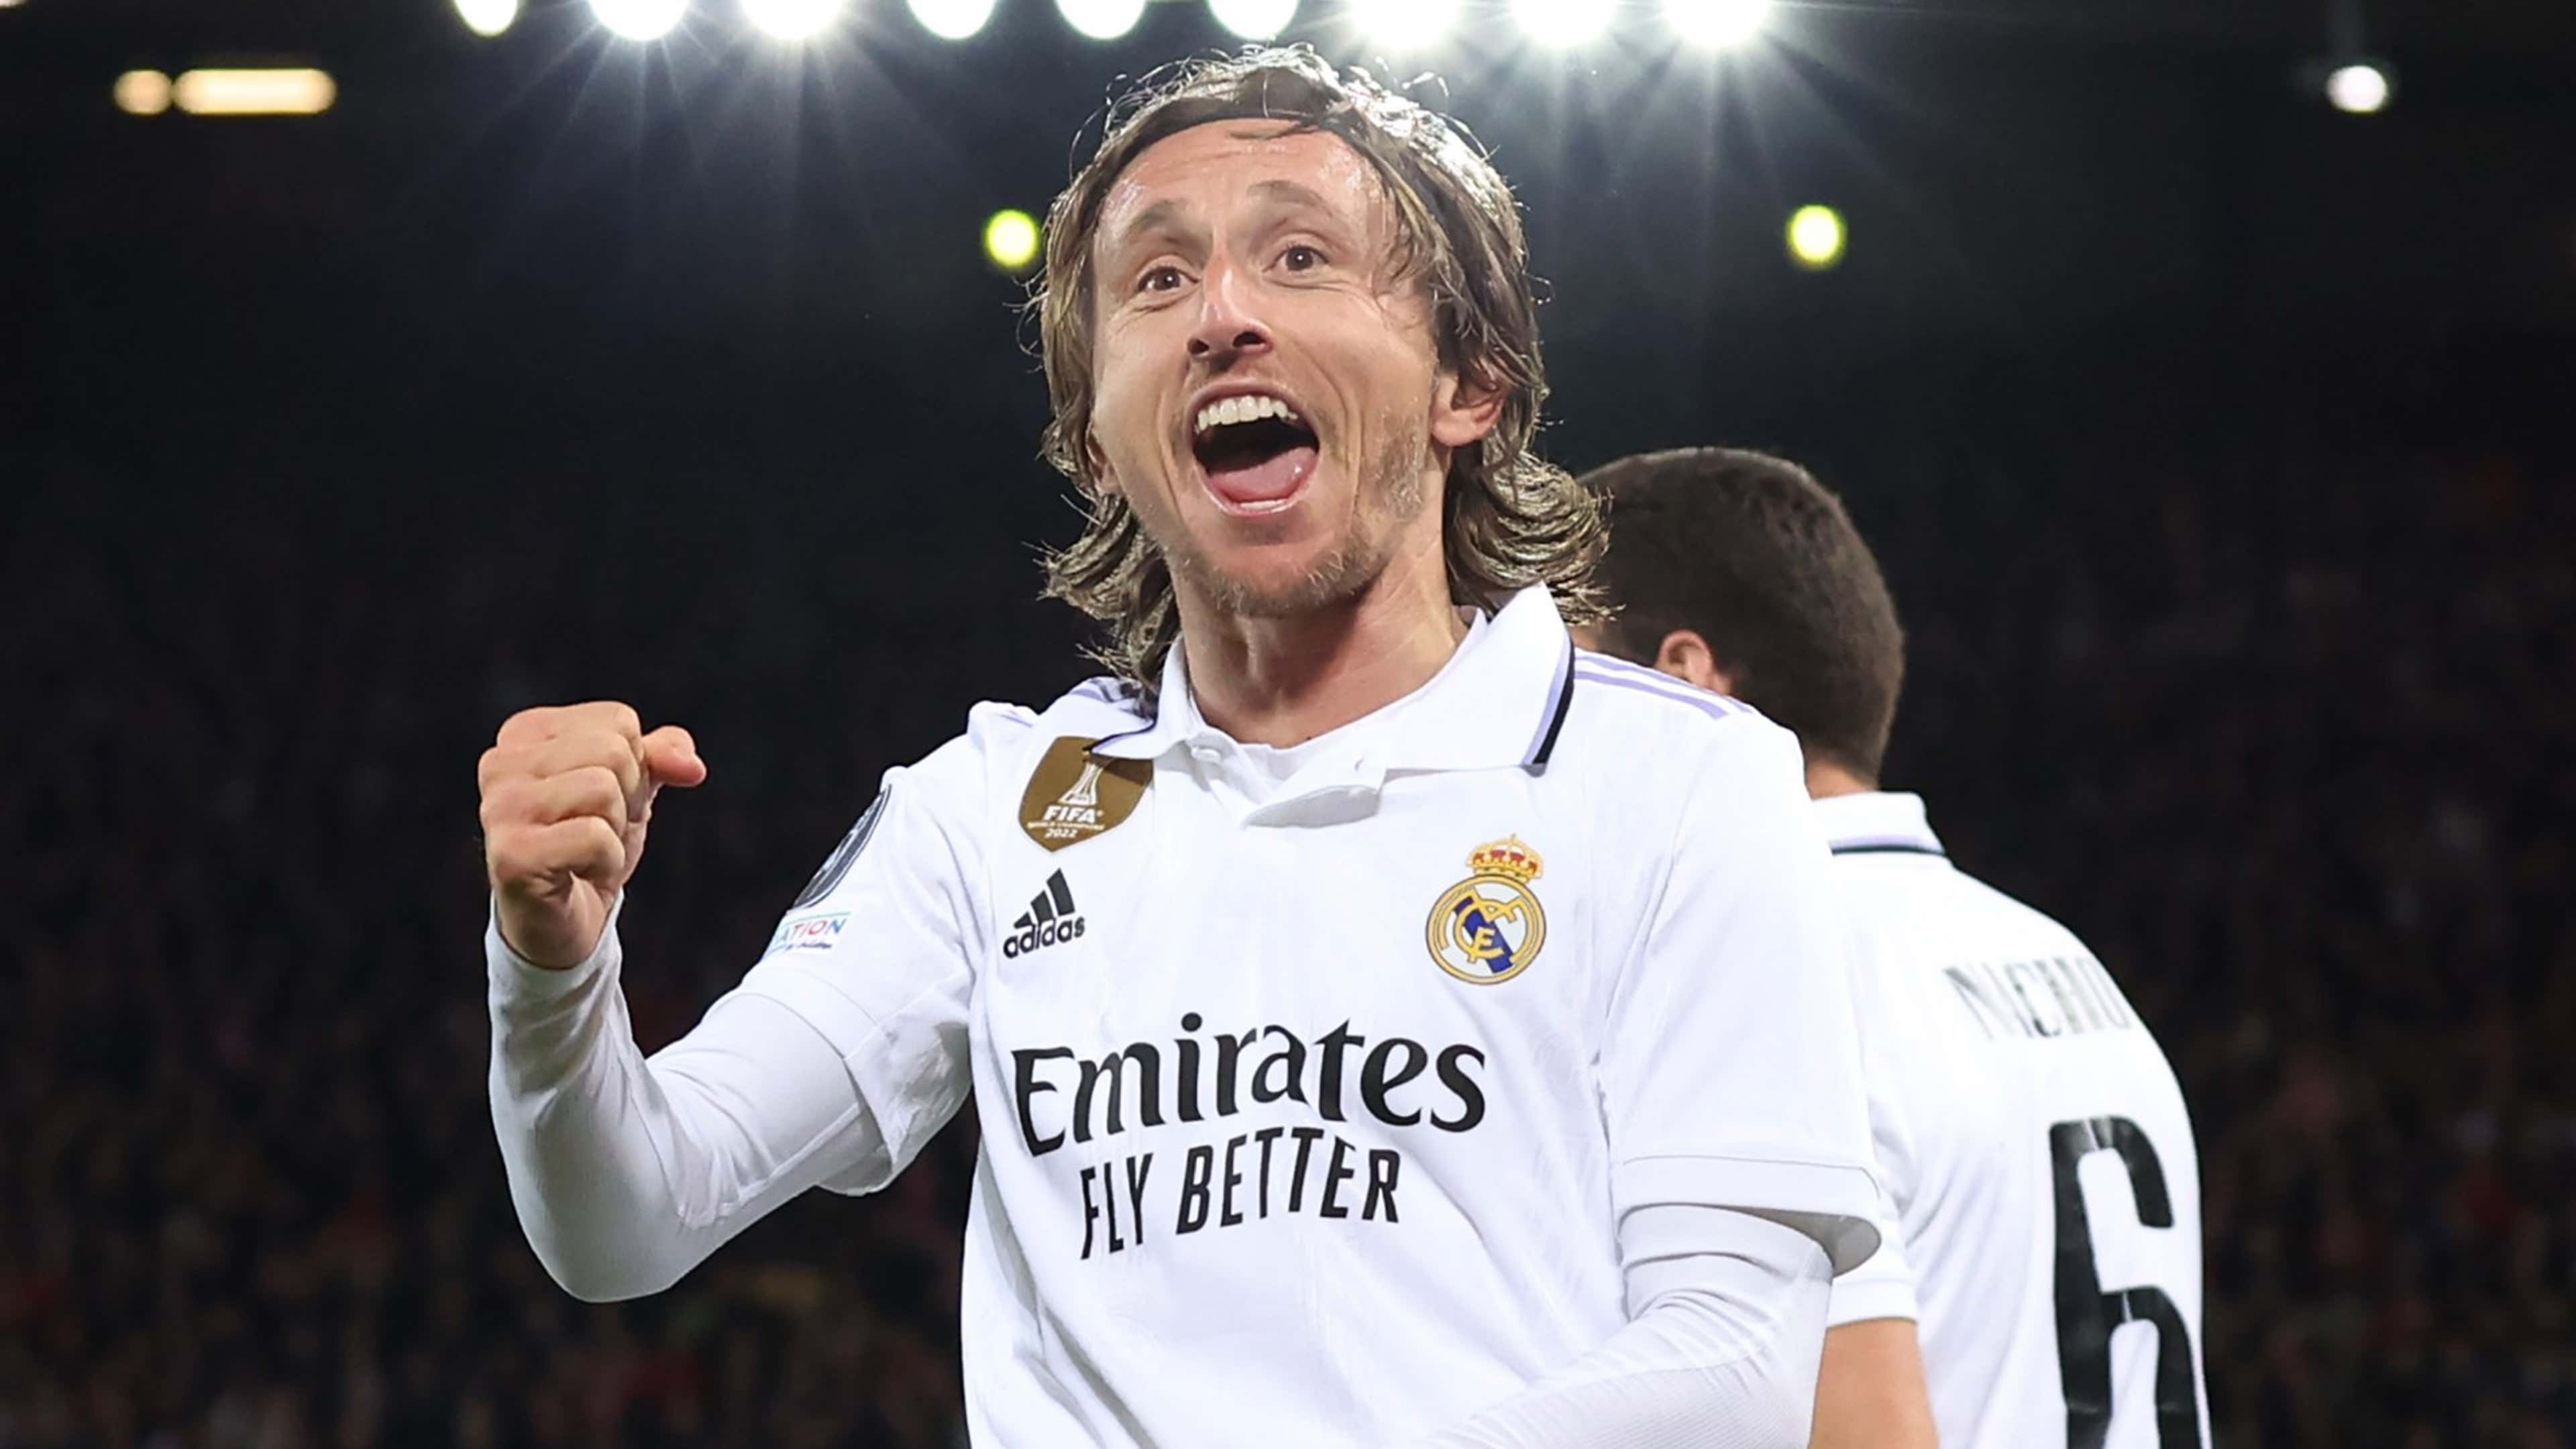 Not Karim Benzema or Vinicius Jr: Luka Modric is the Real Madrid player  that Chelsea should fear the most | Goal.com